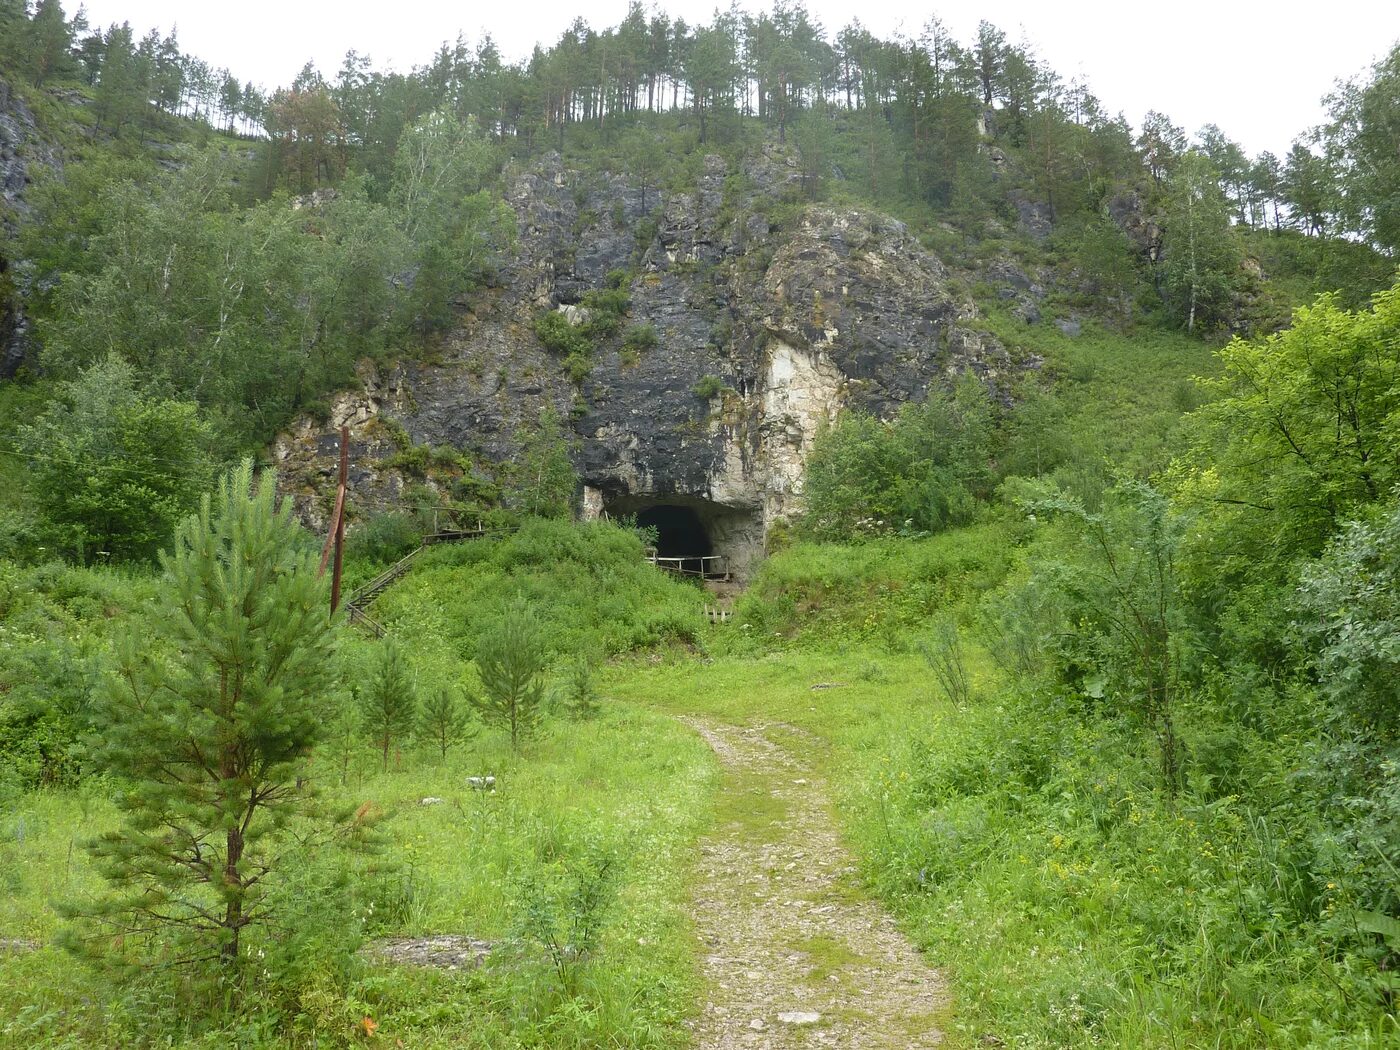 The entrance to Denisova Cave.